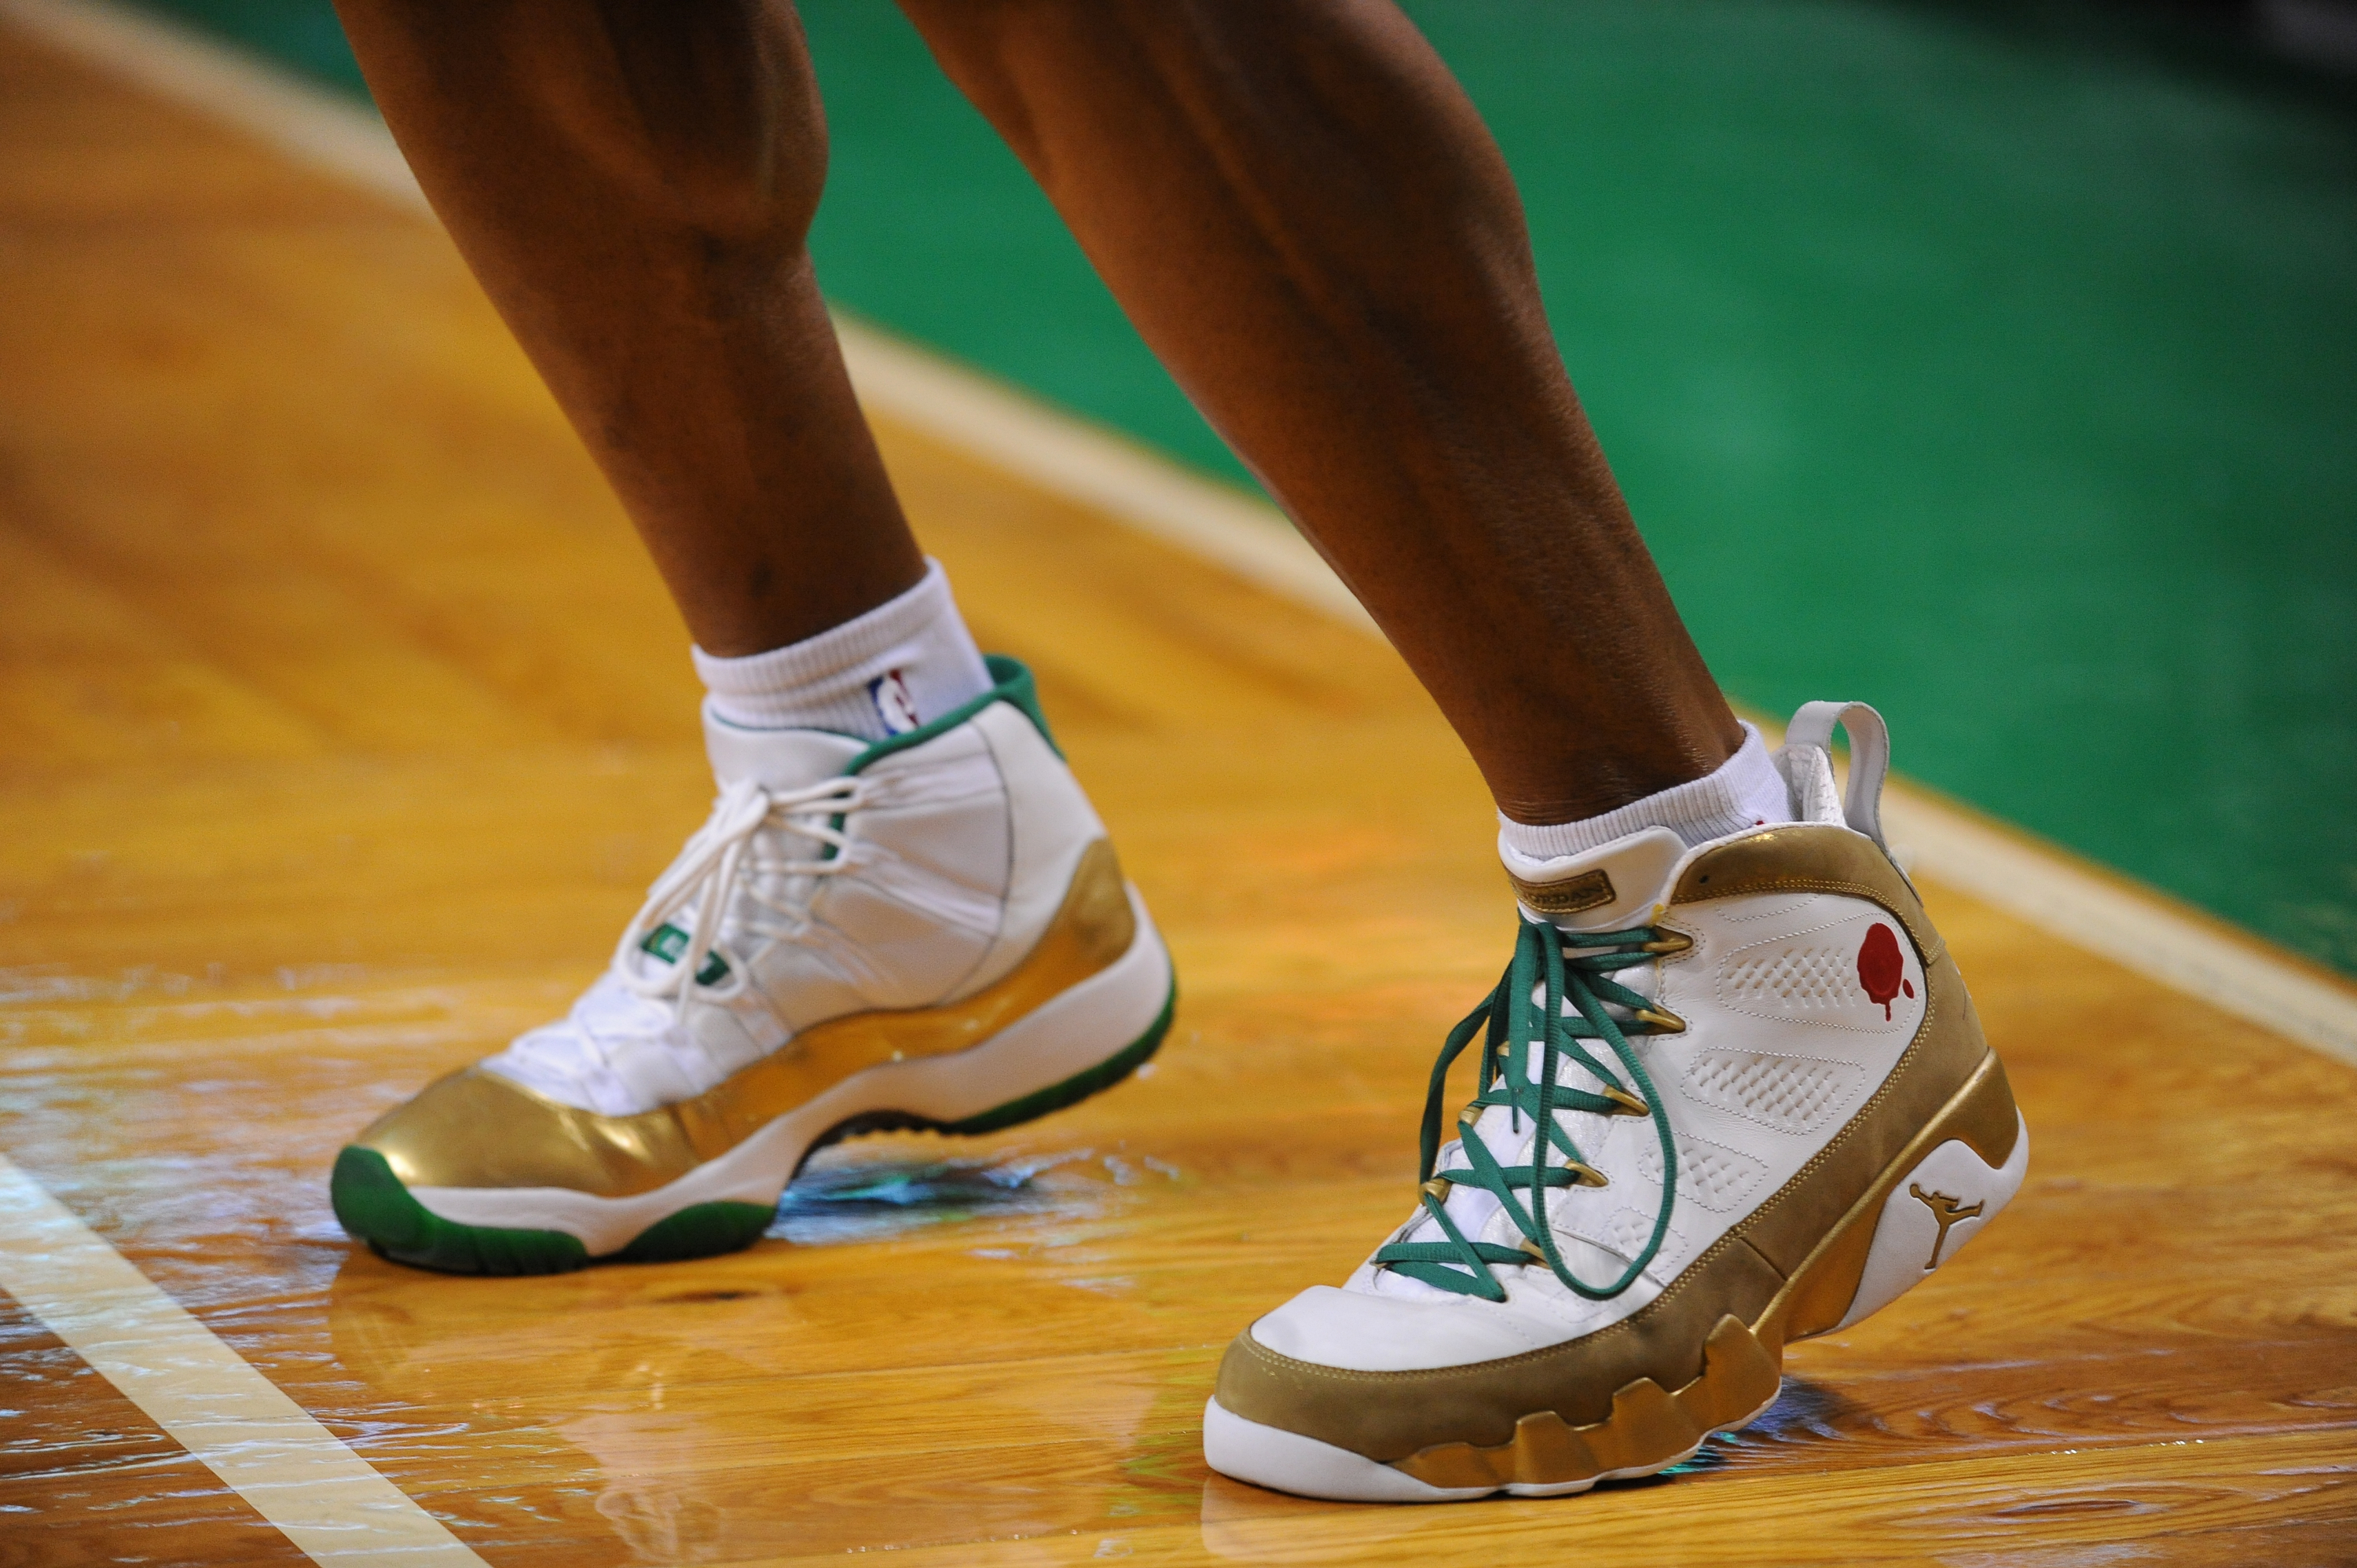 ray allen basketball shoes